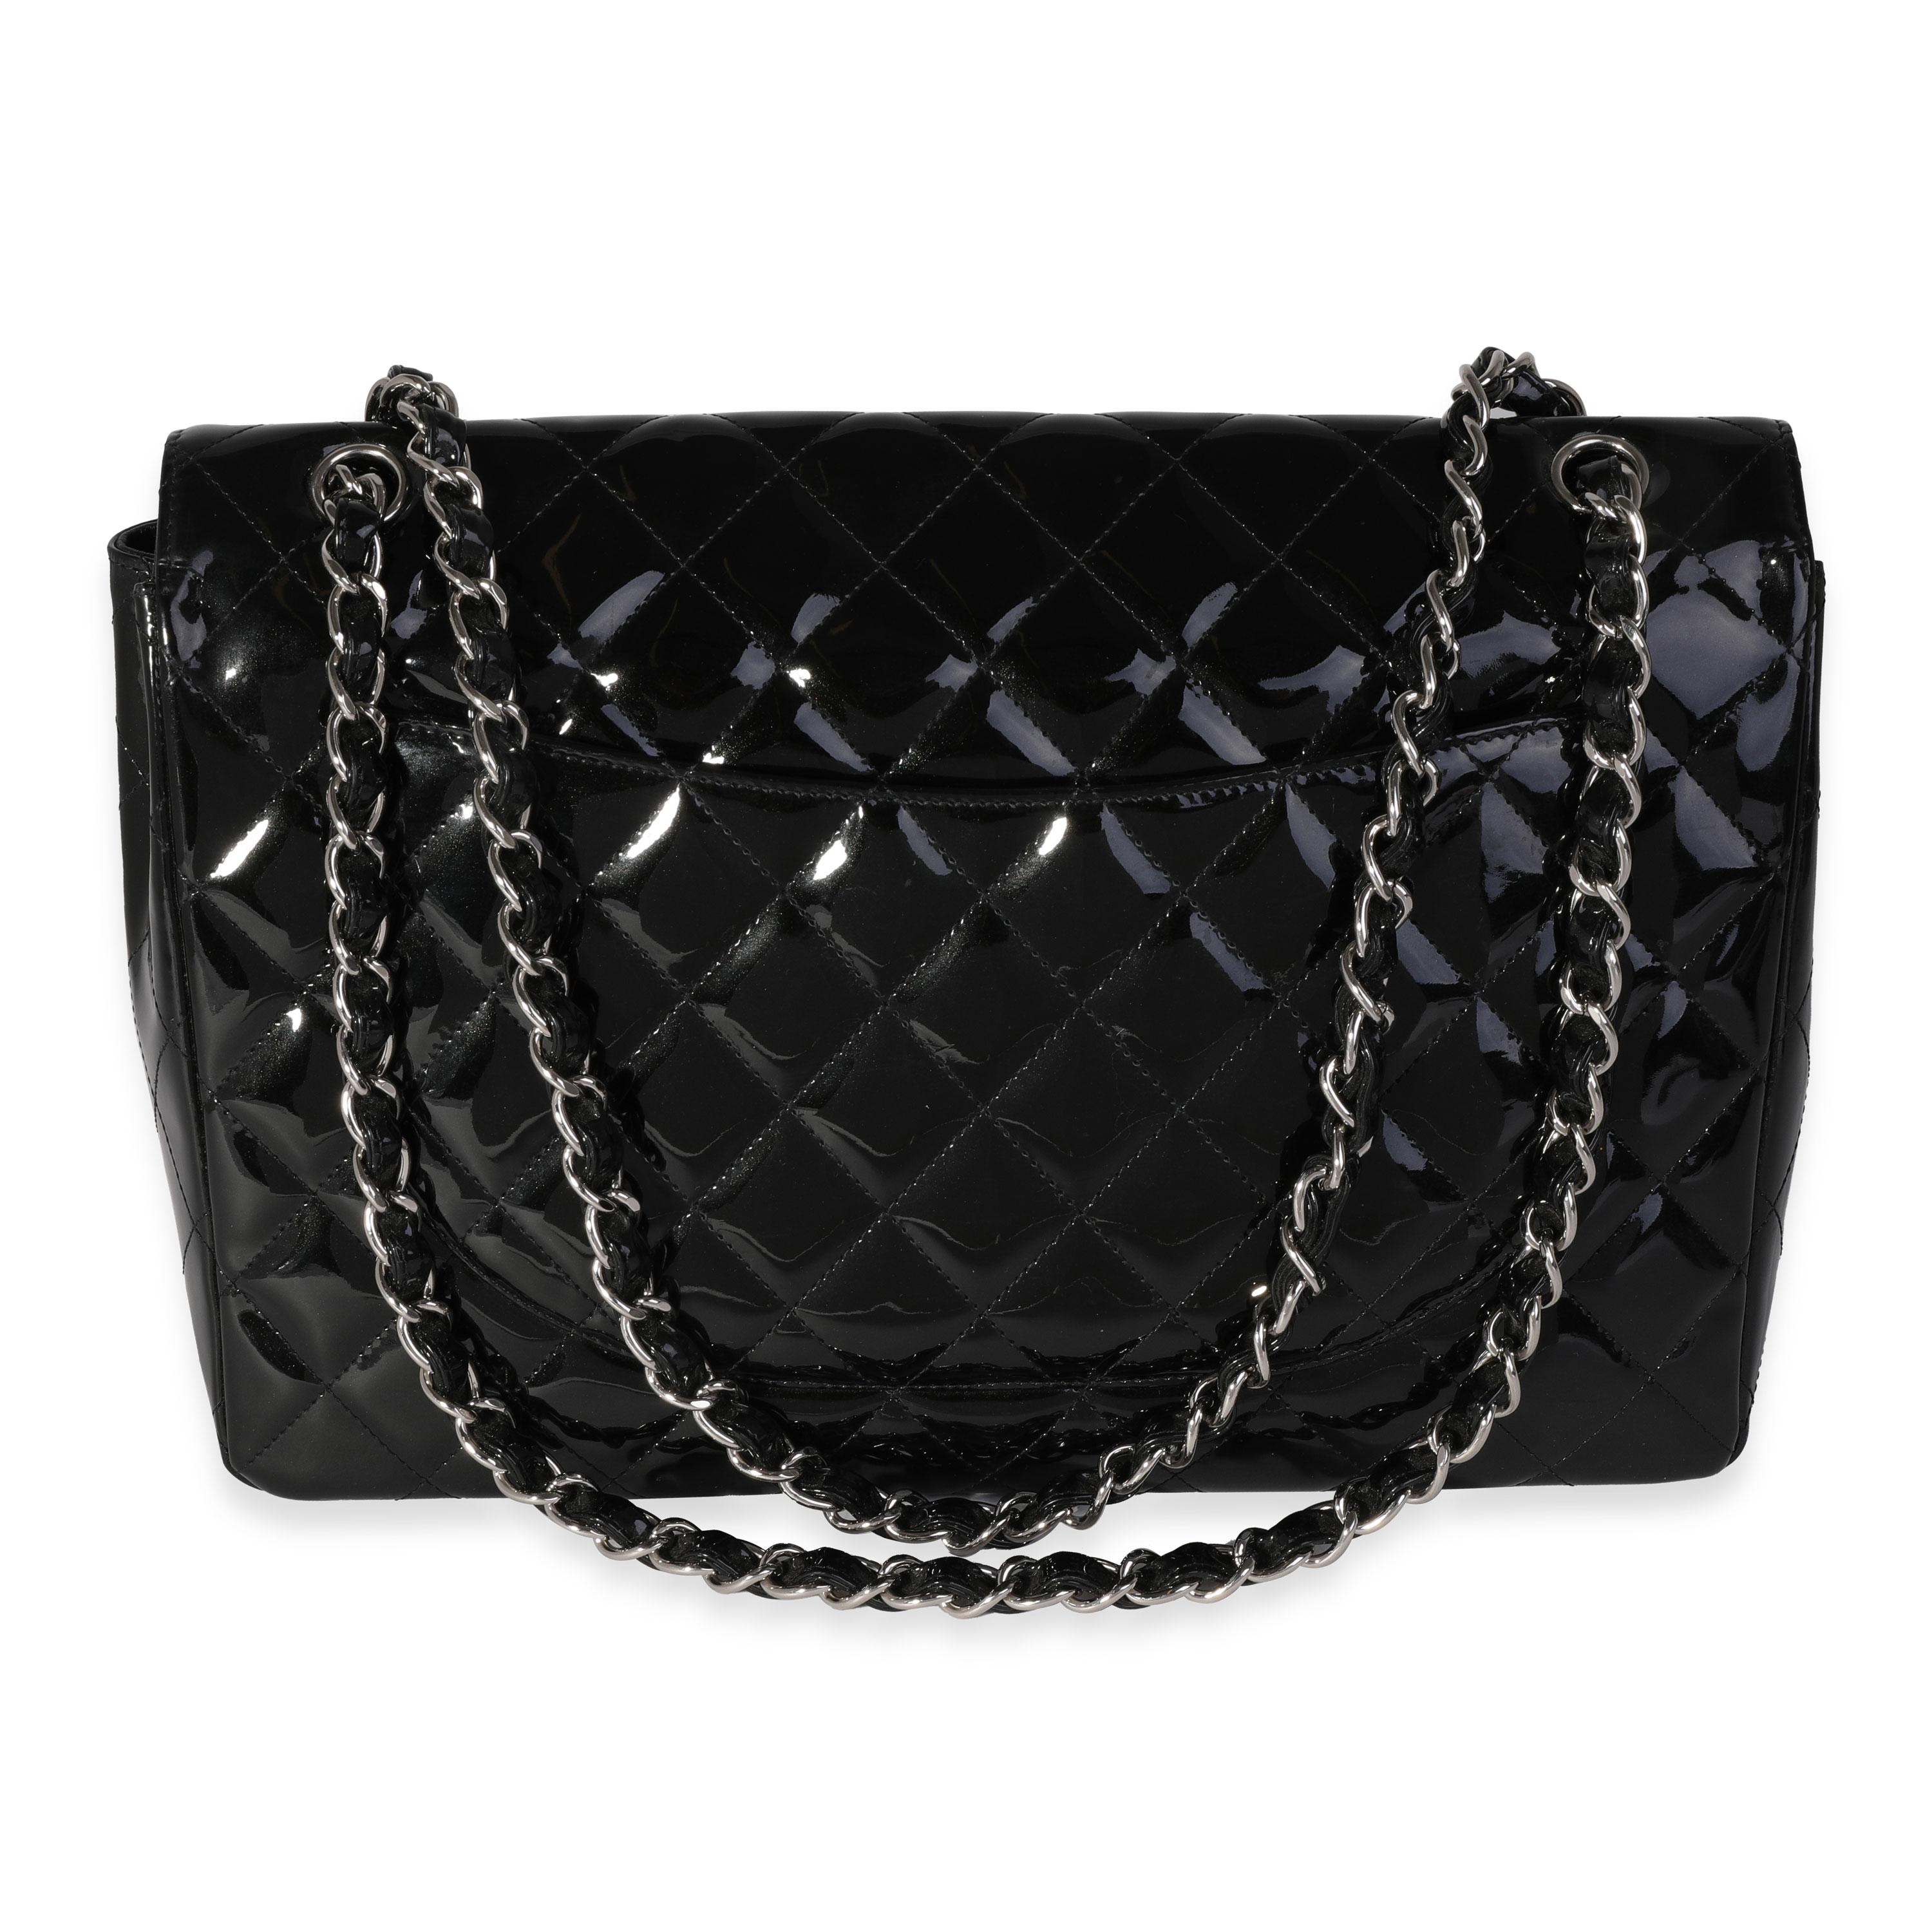 Chanel Black Quilted Patent Leather Maxi Classic Single Flap Bag In Good Condition For Sale In New York, NY